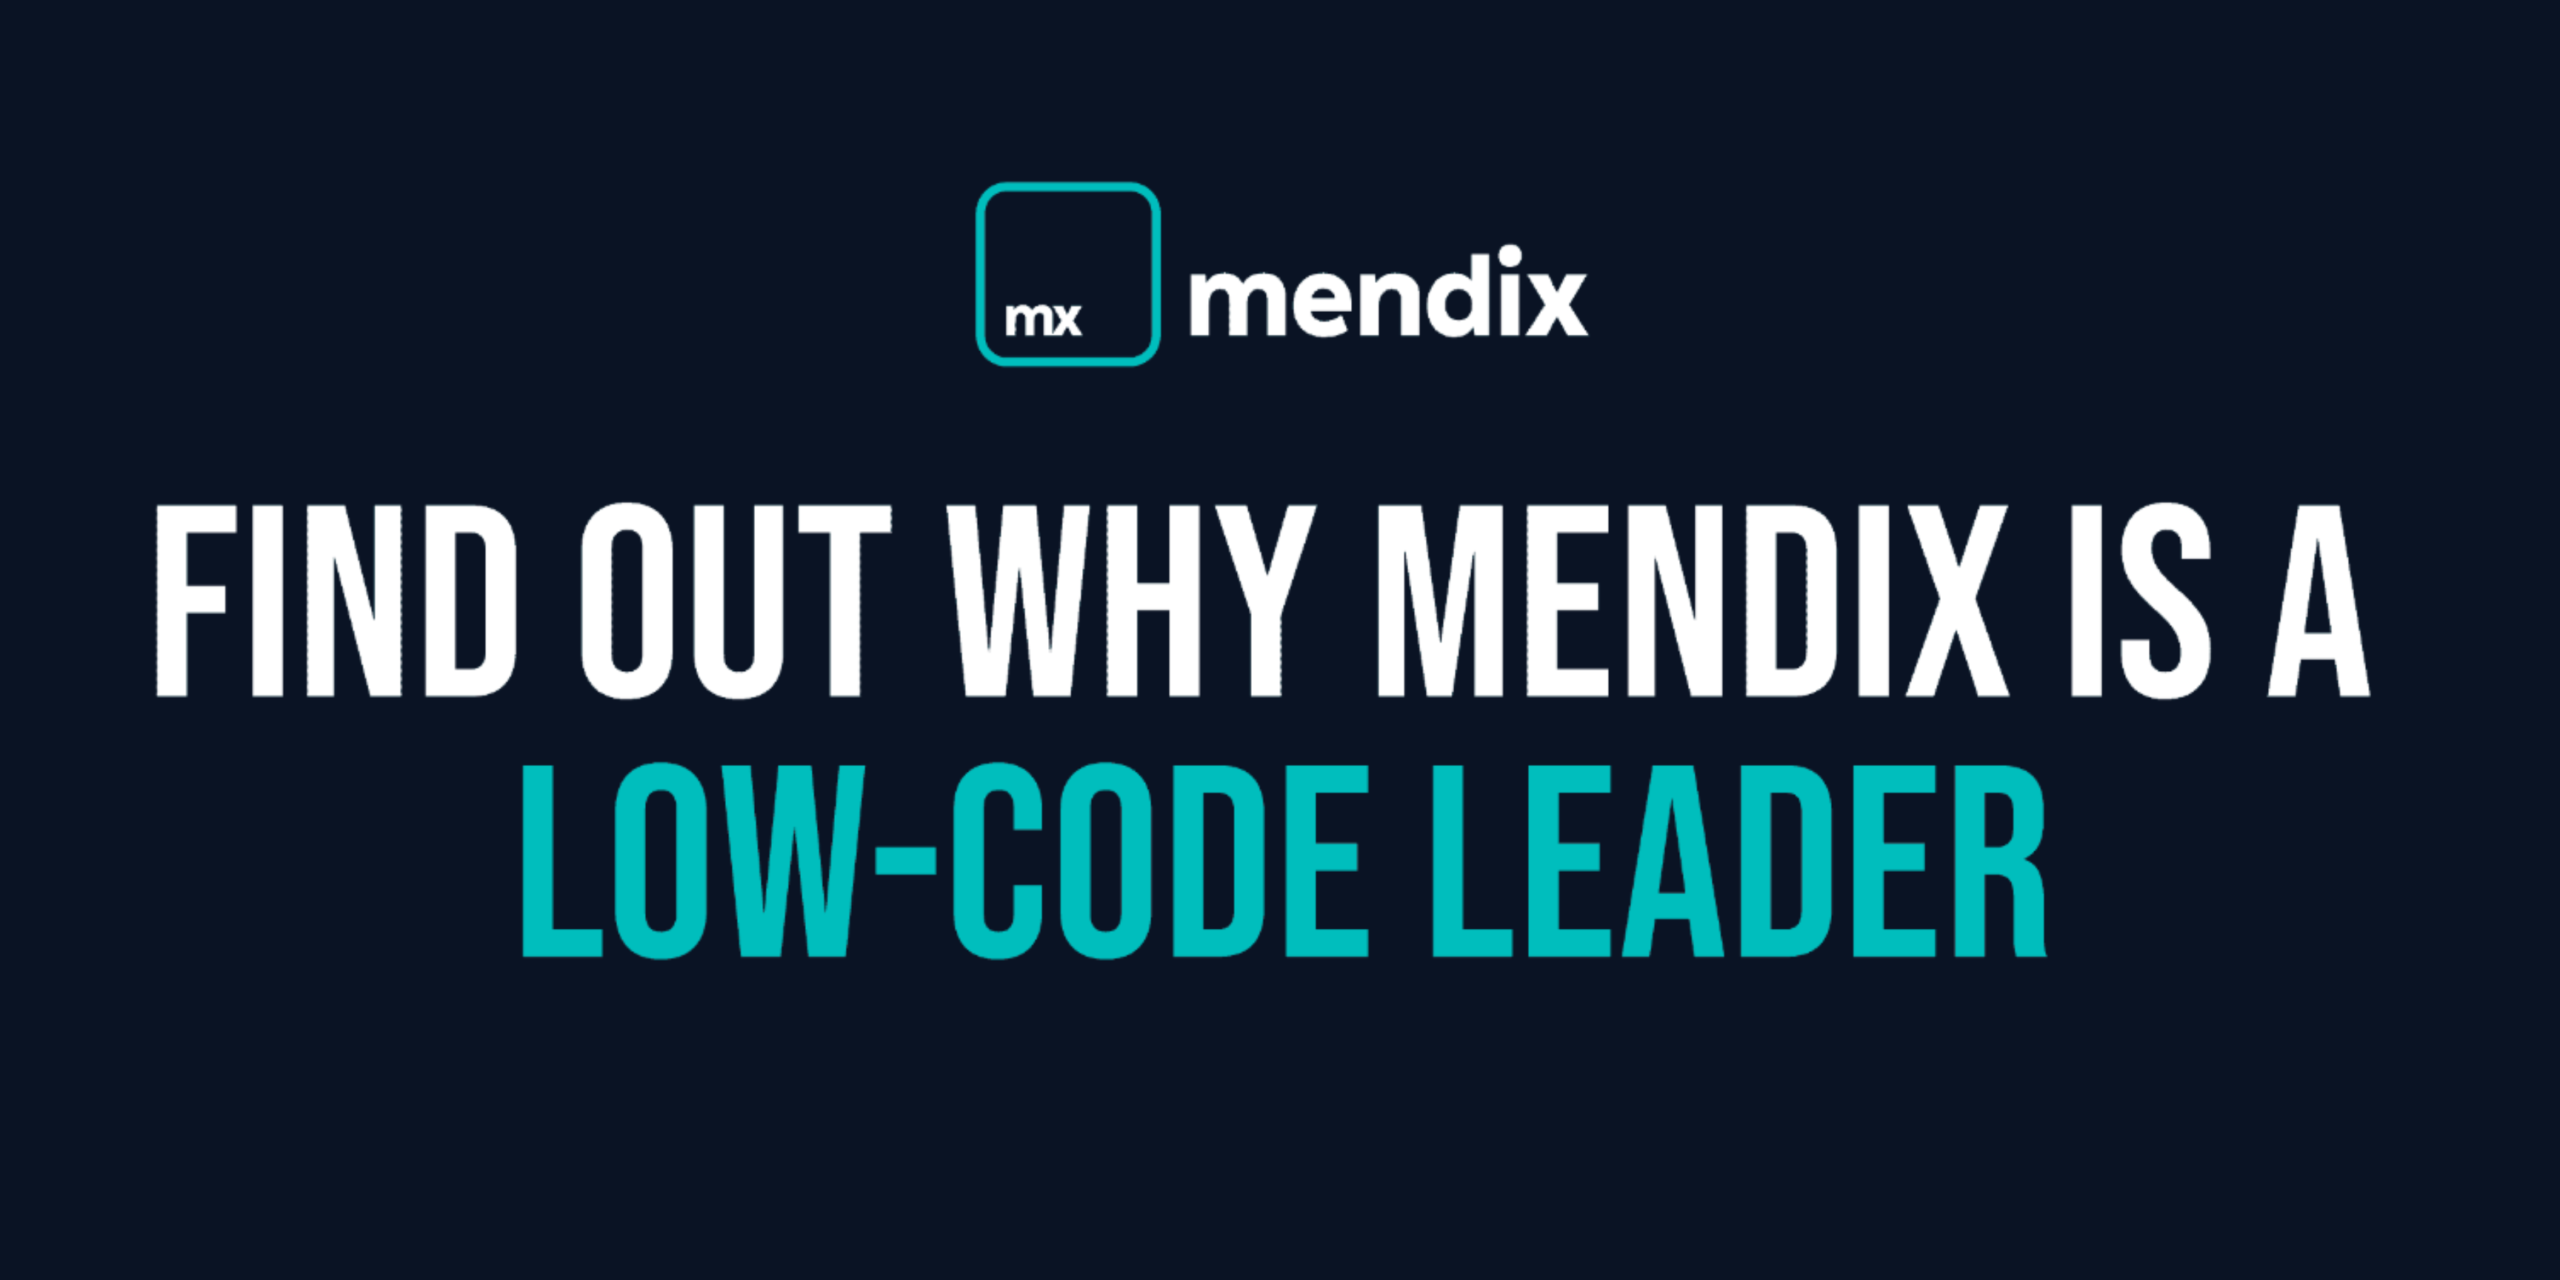 Why Is Mendix A Low-code Leader?